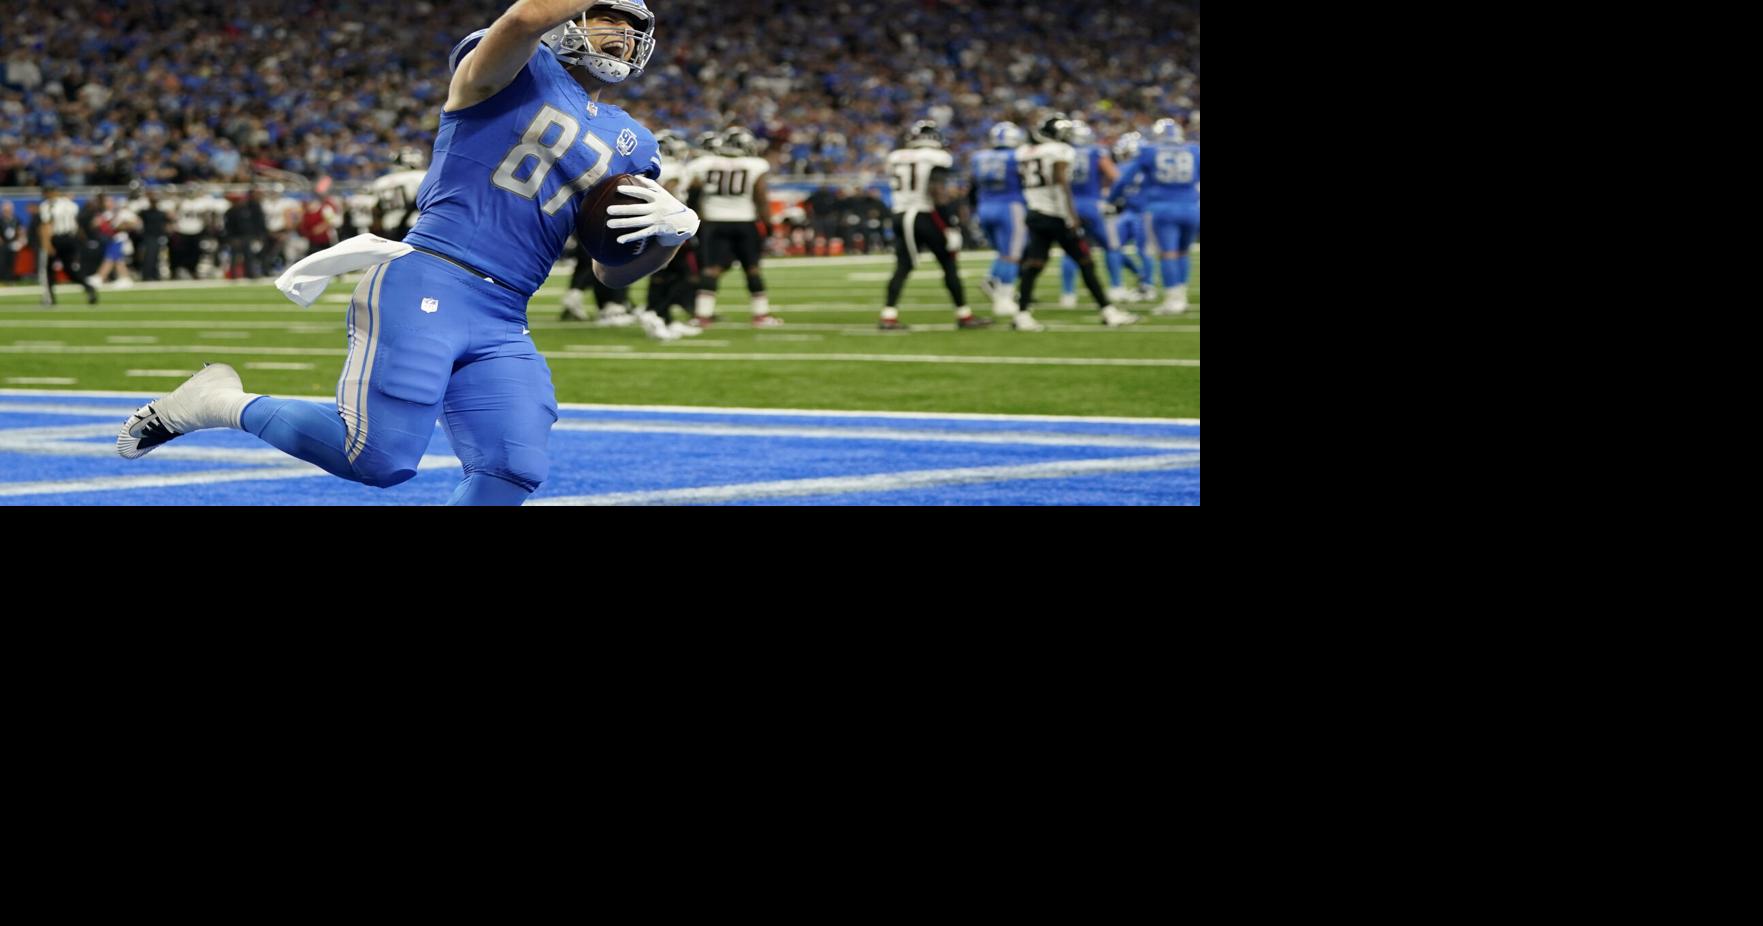 Lions Aidan Hutchinson wins NFC Player of the Week - A to Z Sports